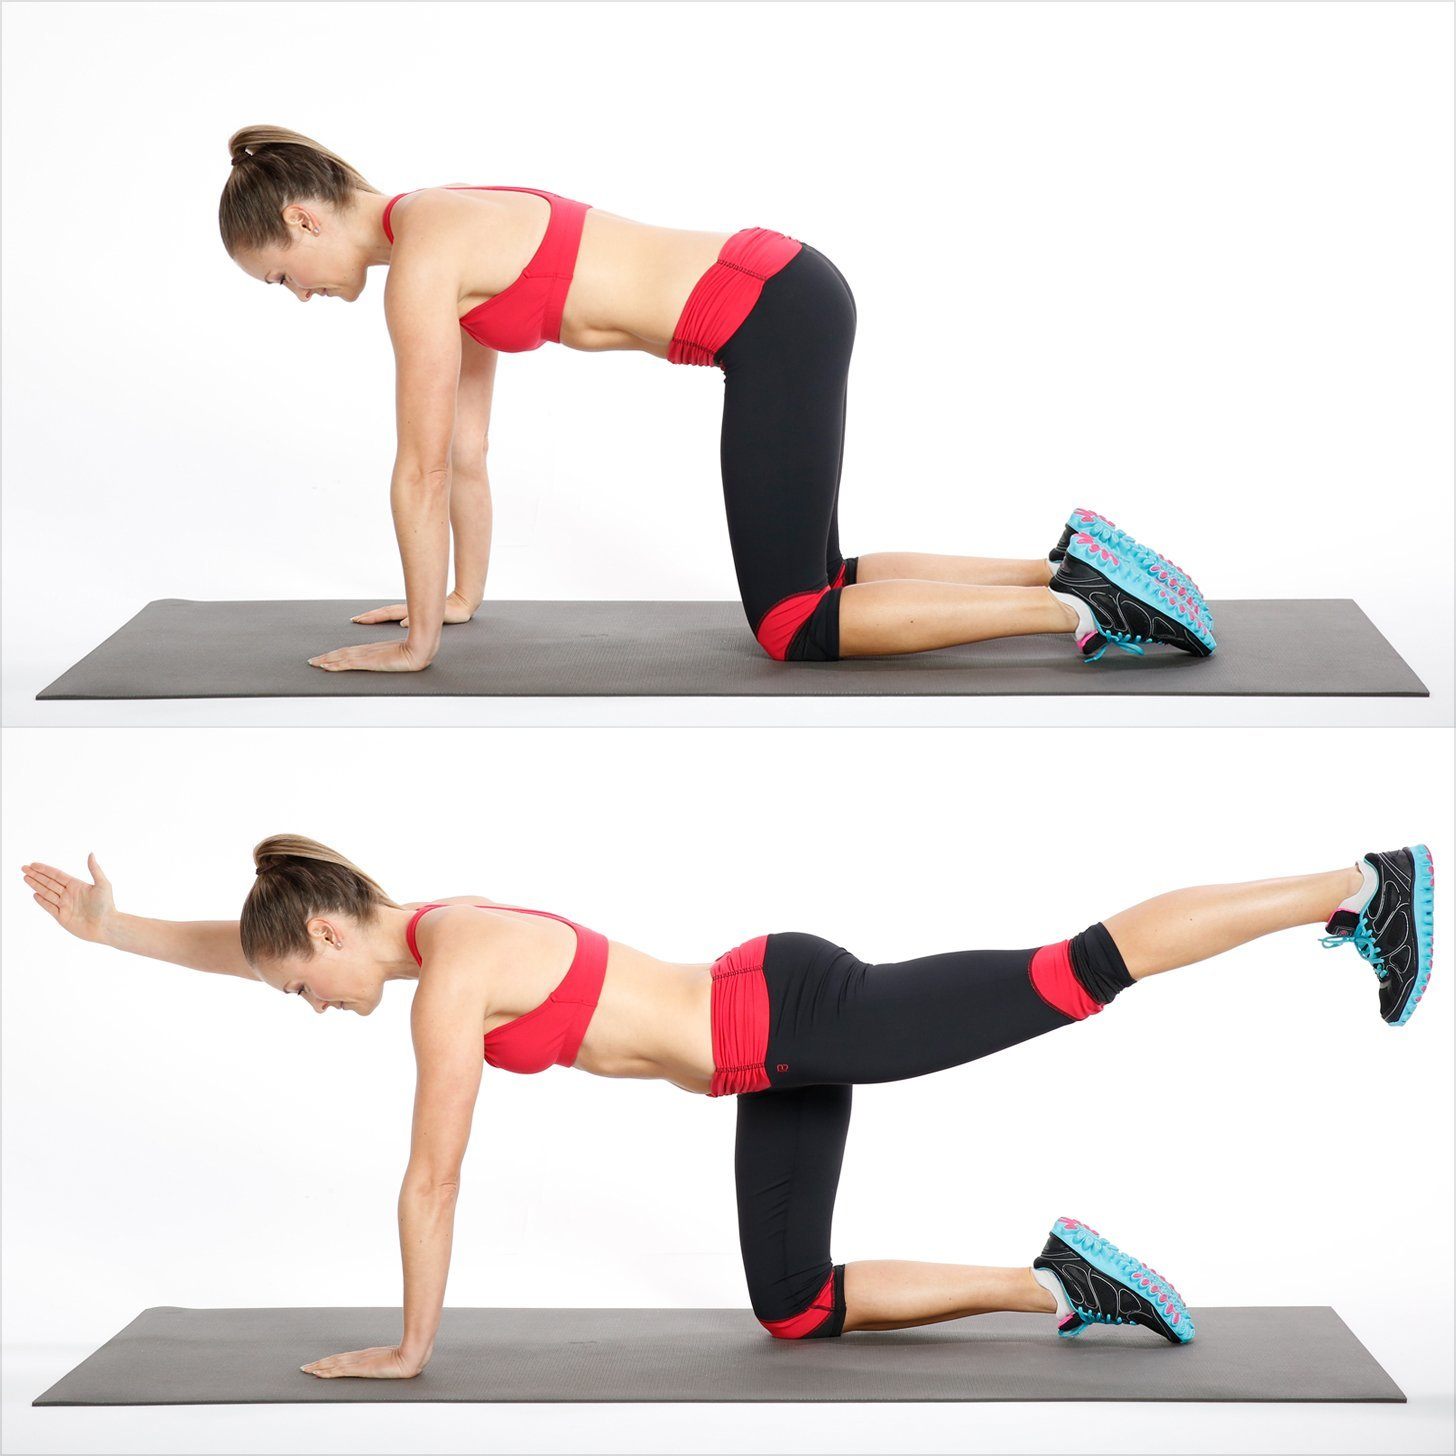 10 Best Exercises To Relieve Lower Back Pain